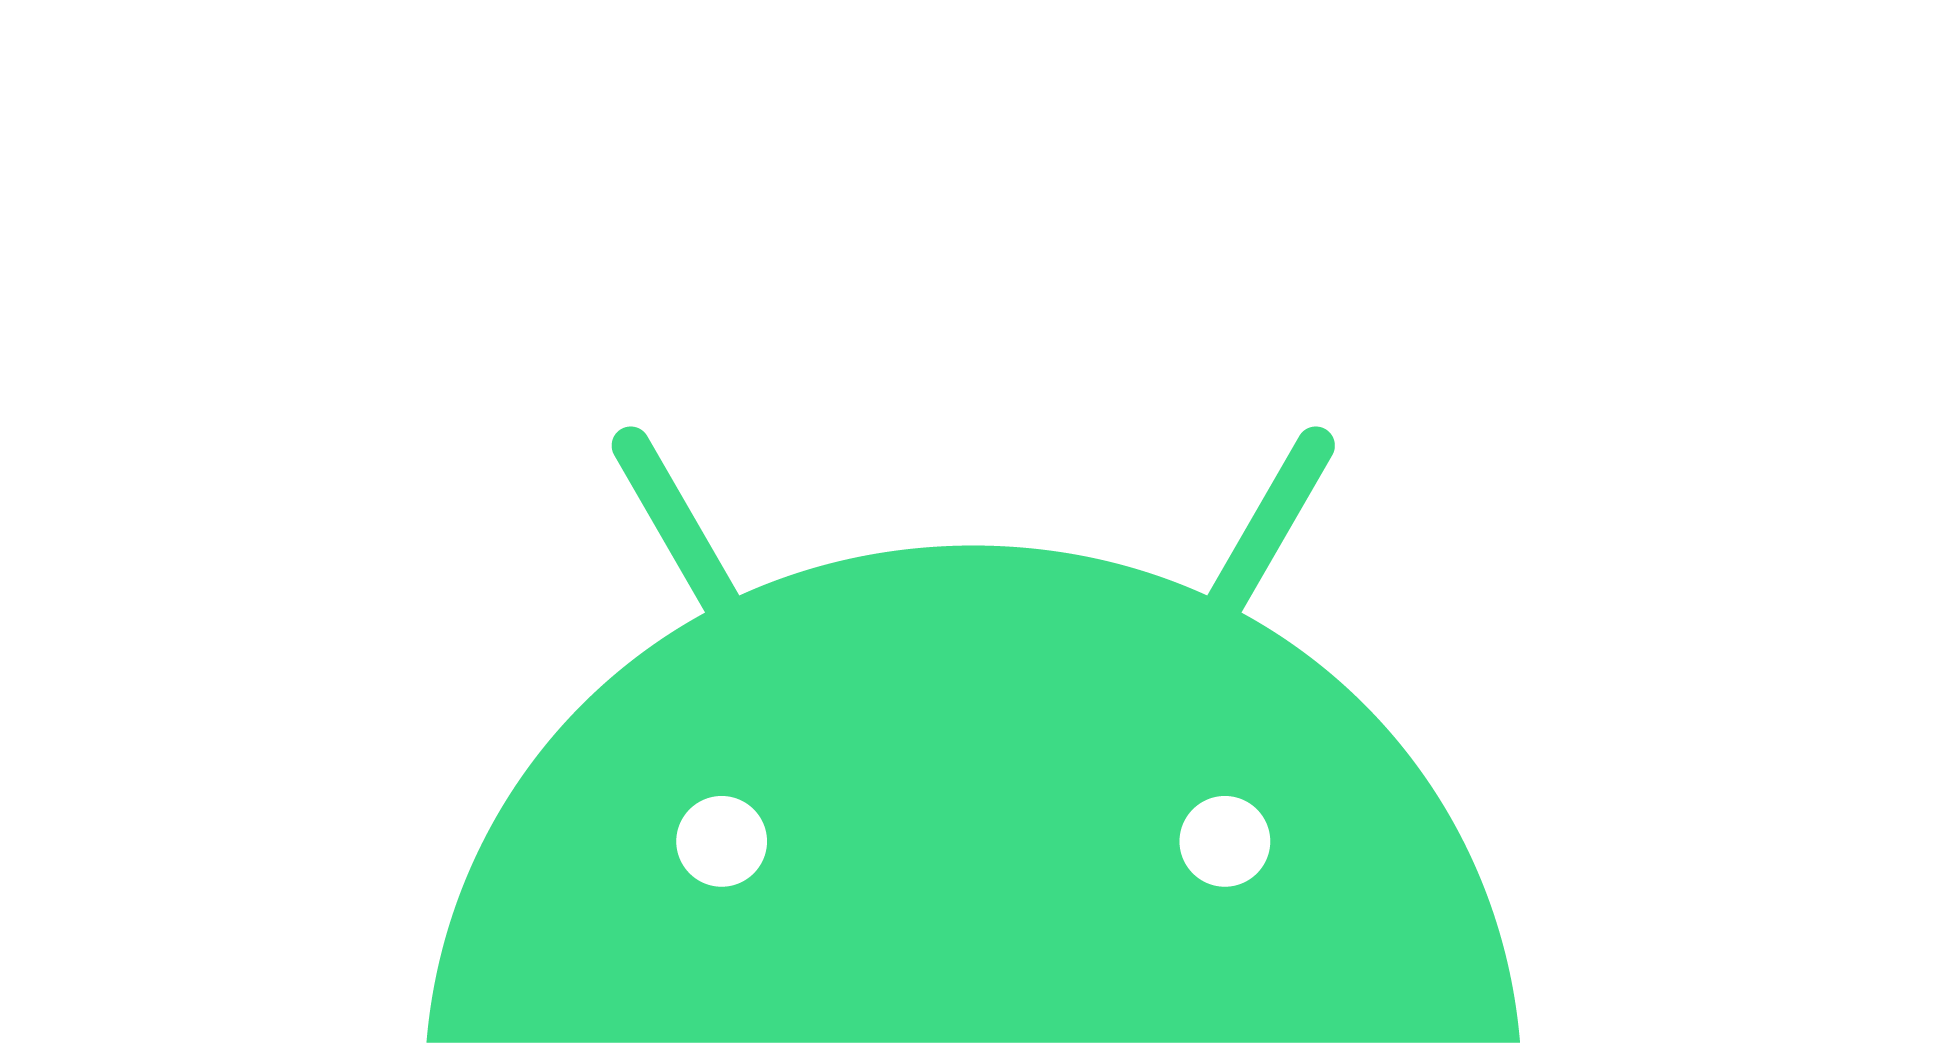 Android_symbol_green_RGB.png